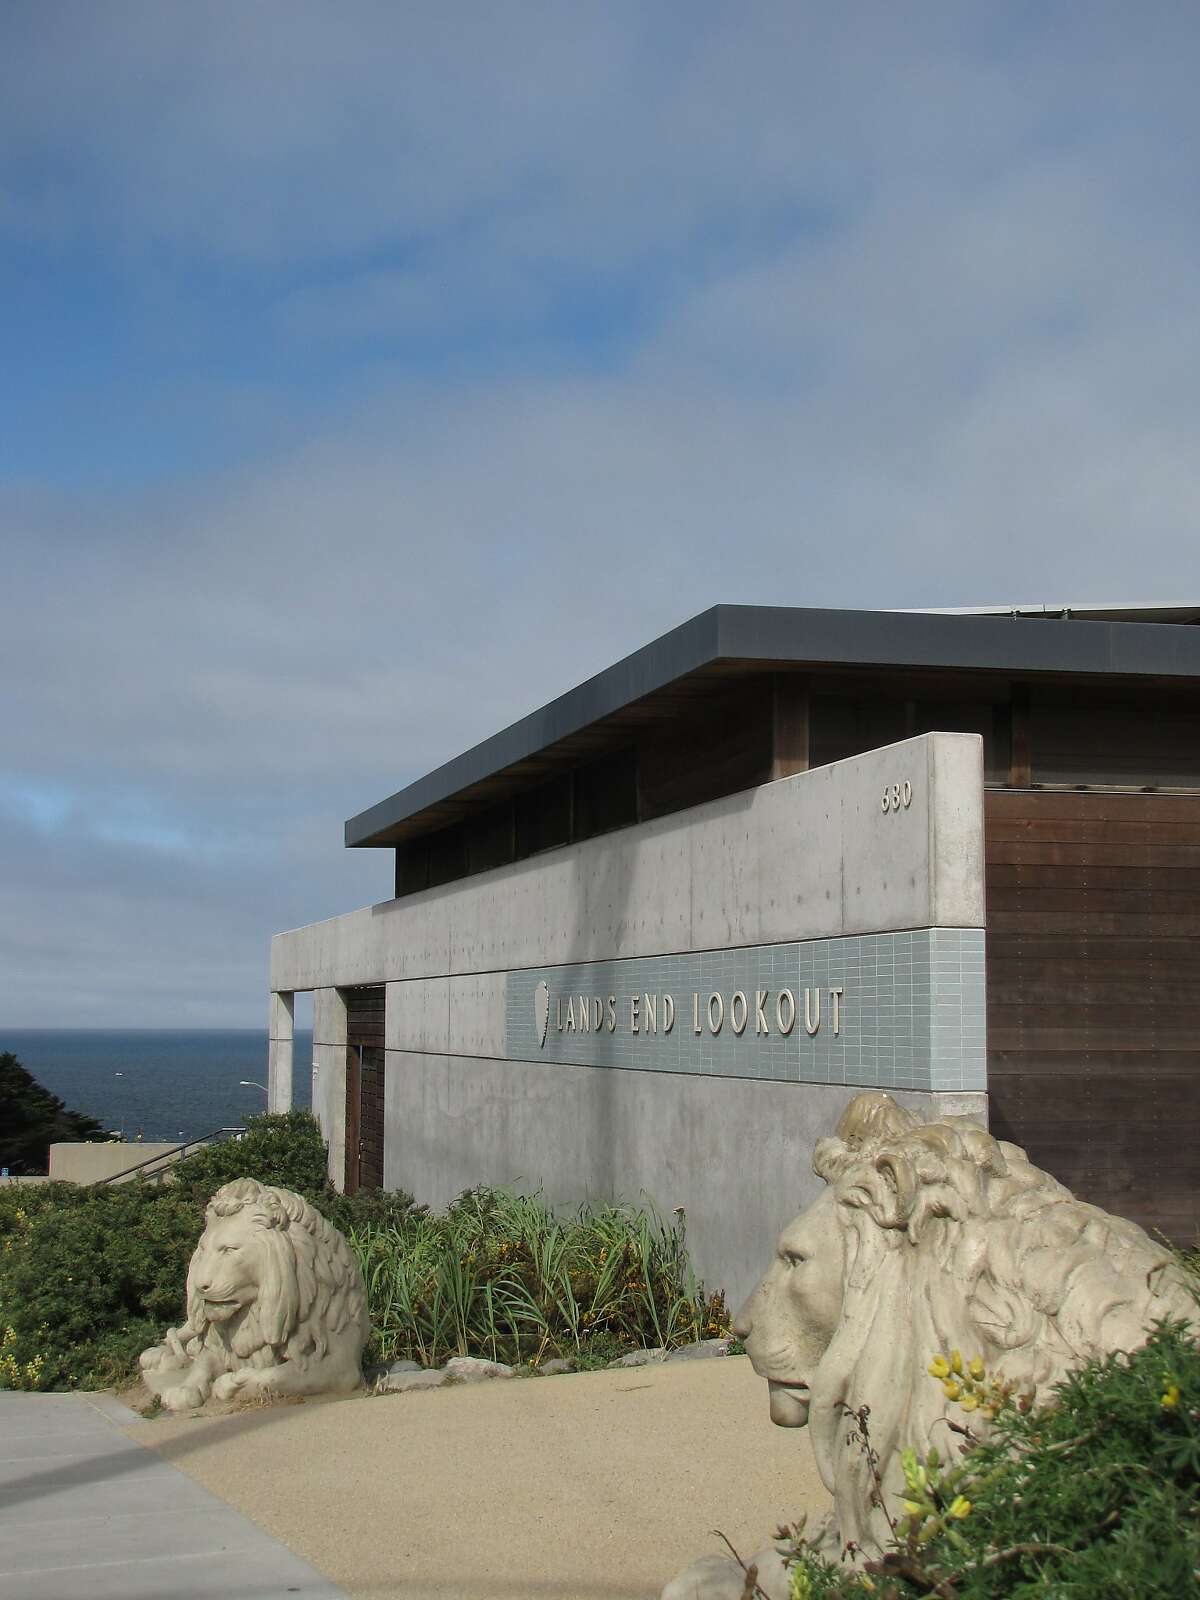 The visitor's center at Lands End, designed by the architecture firm EHDD, is one of the city's most striking modern buildings -- and appropriately so, since it's in one of the most striking physical locations.